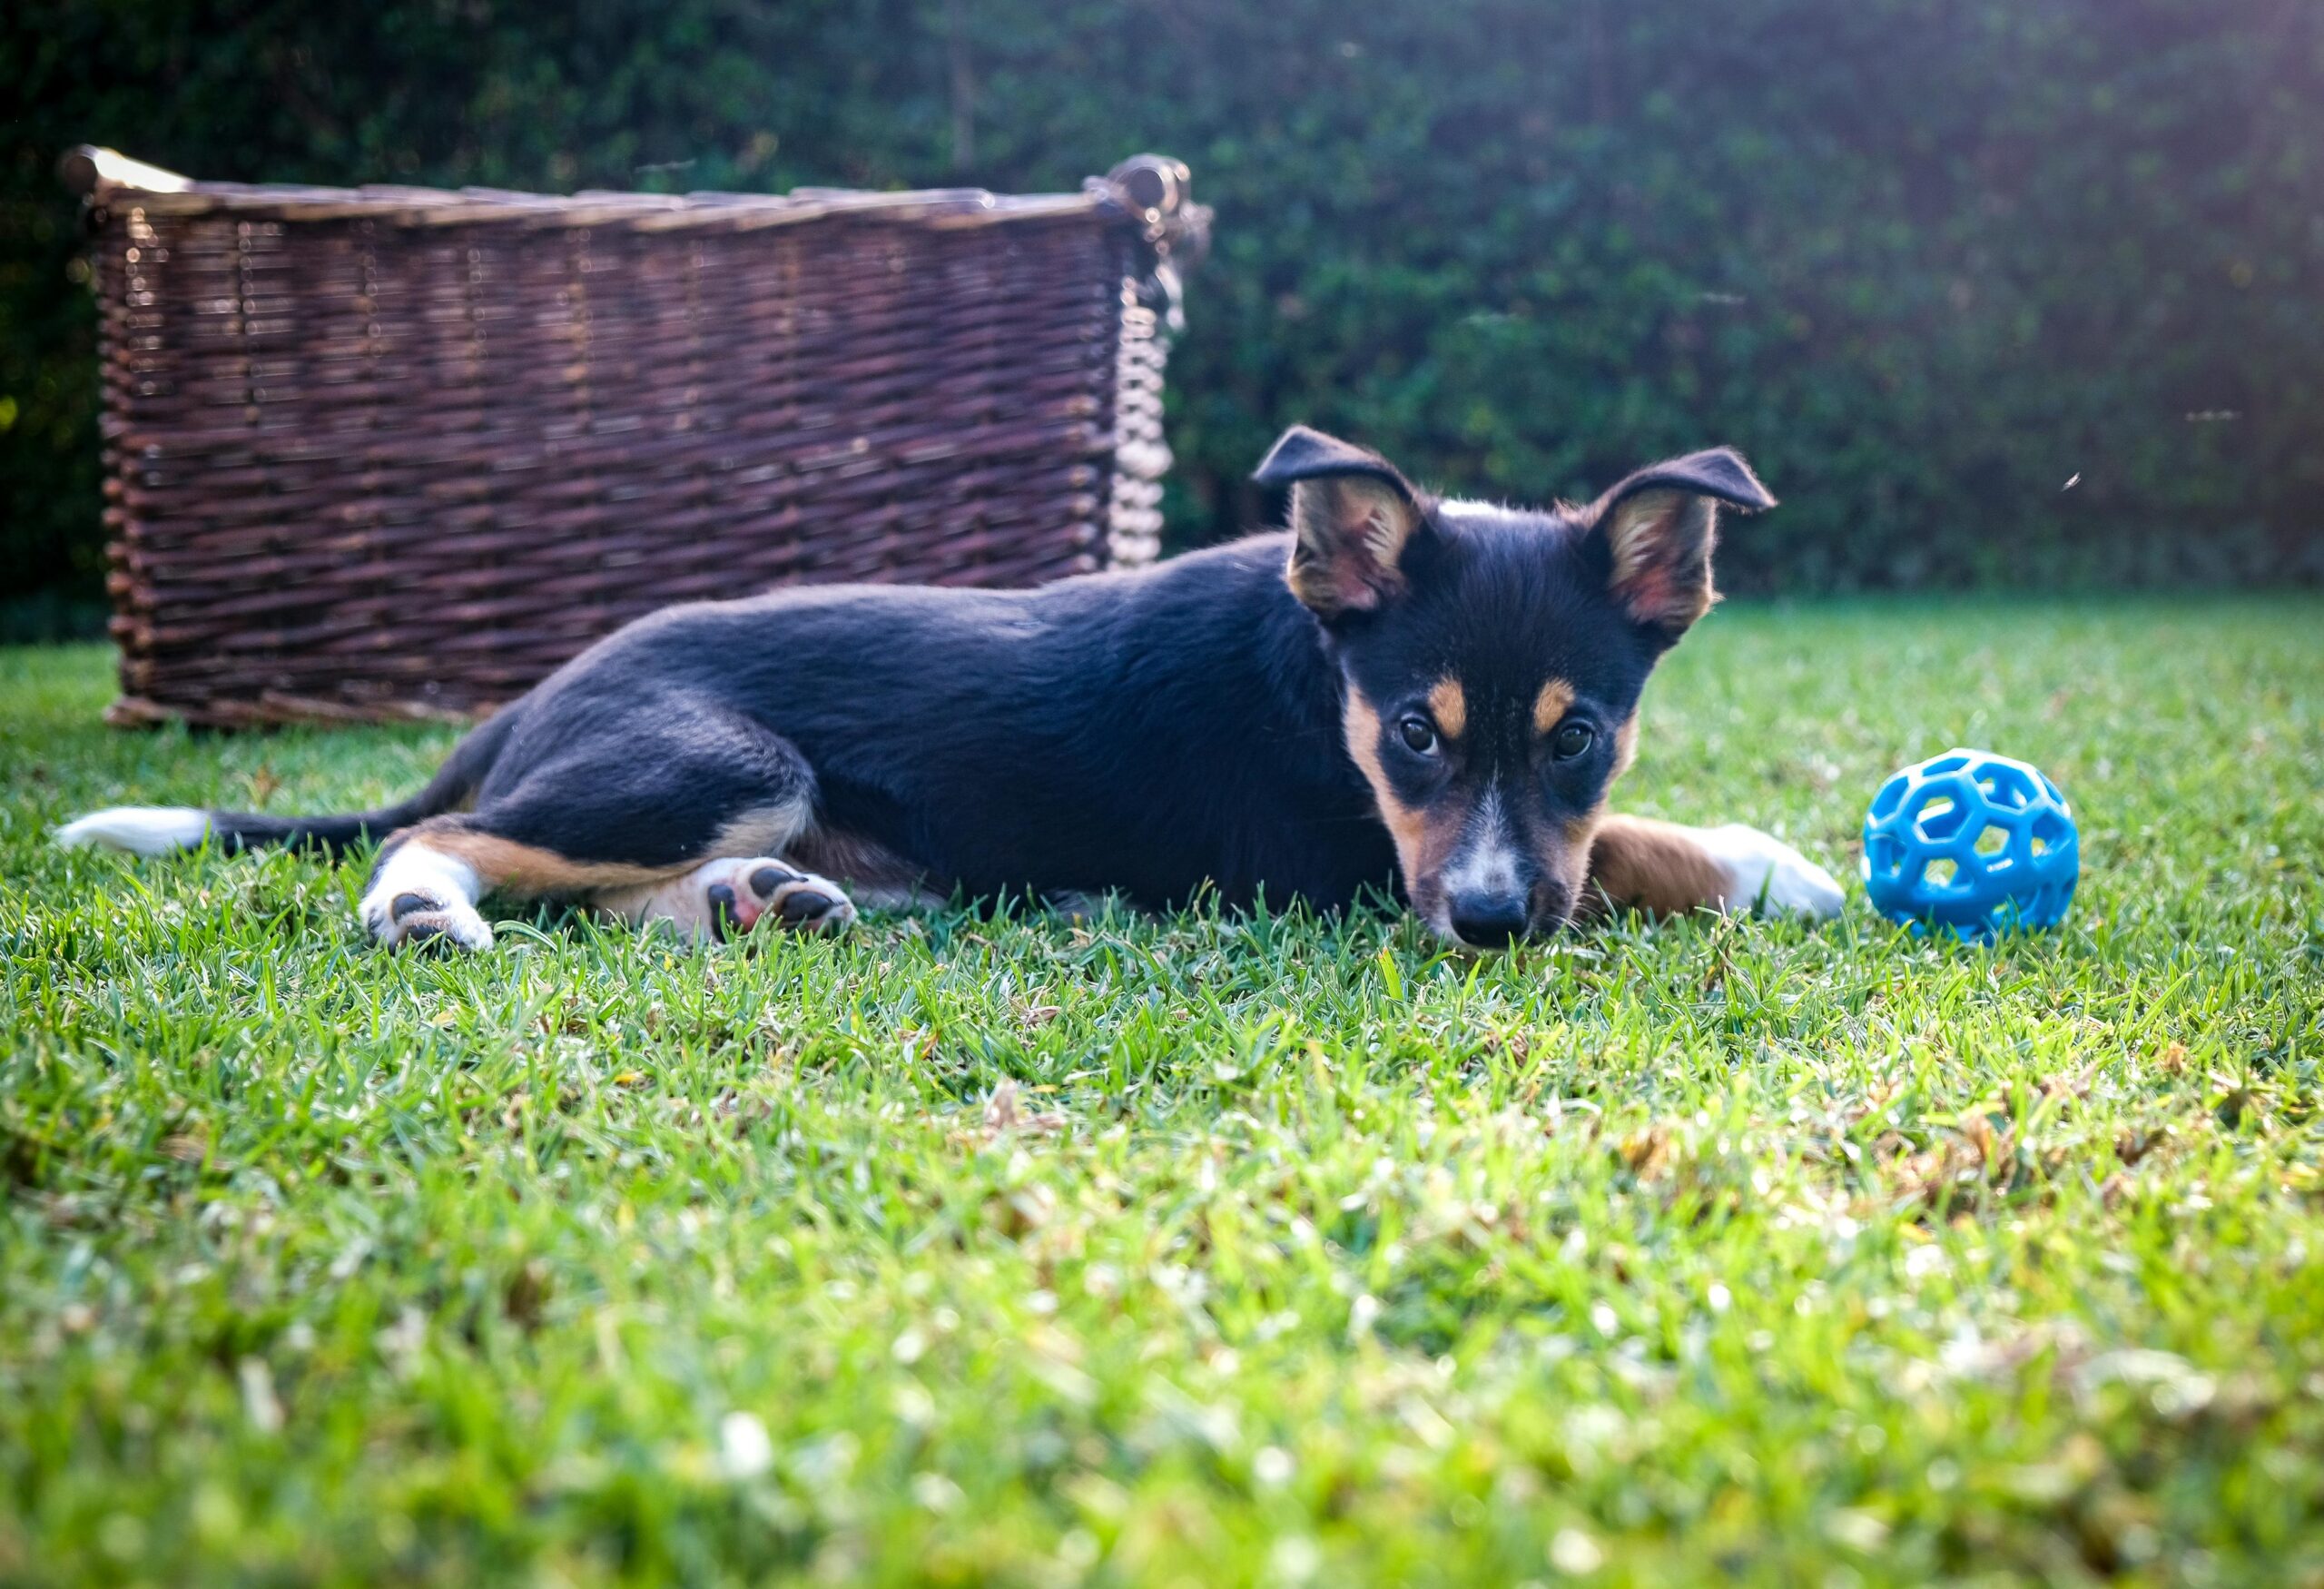 Blue ball in front of a dog lying on the grass.